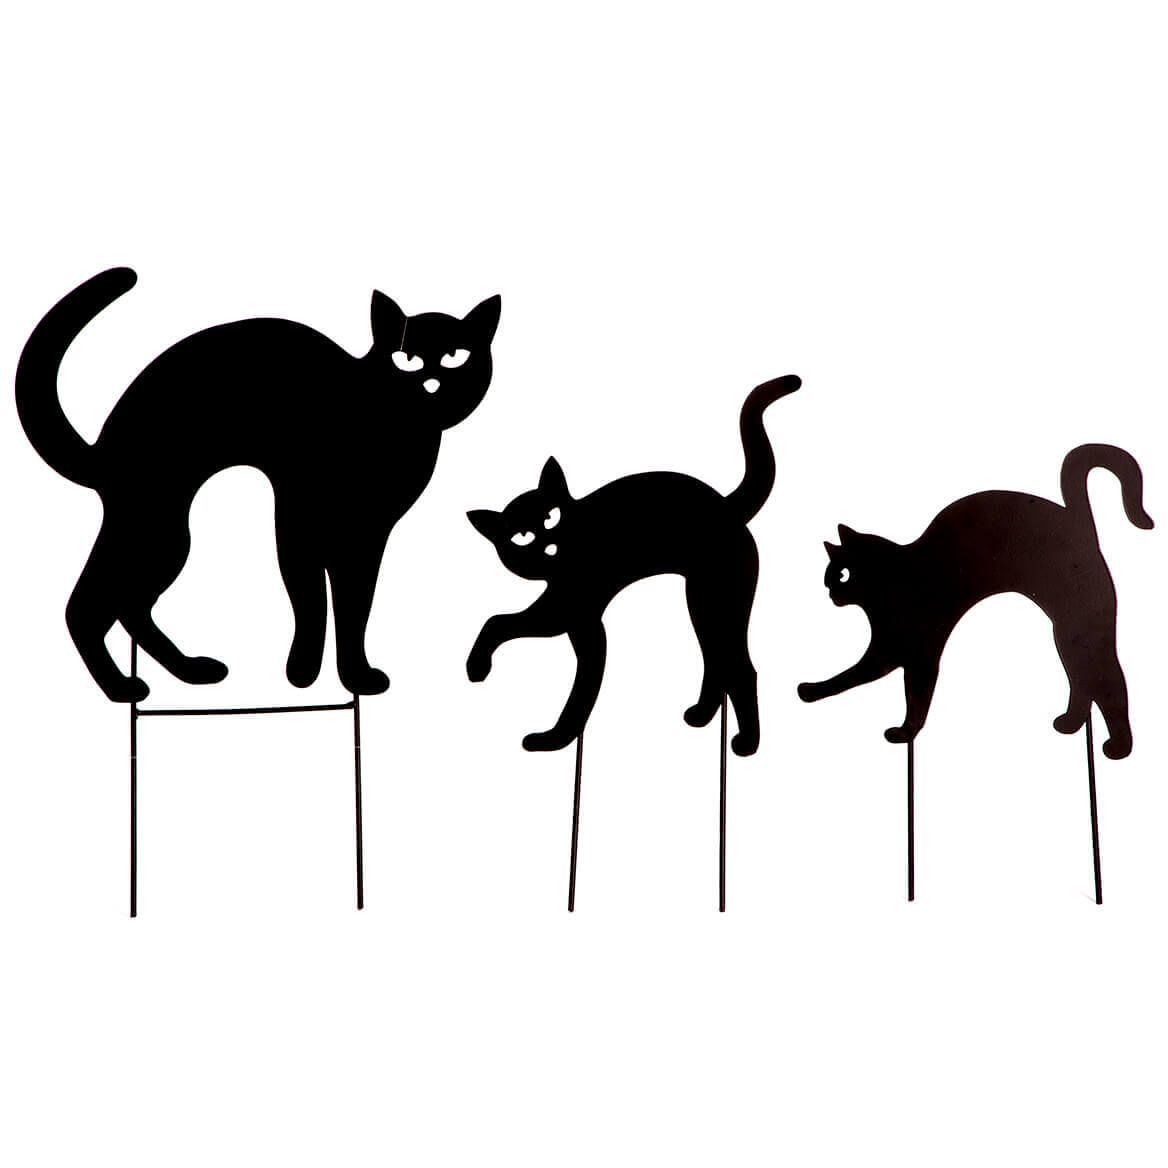 Metal Black Cat Stakes, Set of 3 by Fox River Creations™ + '-' + 365652